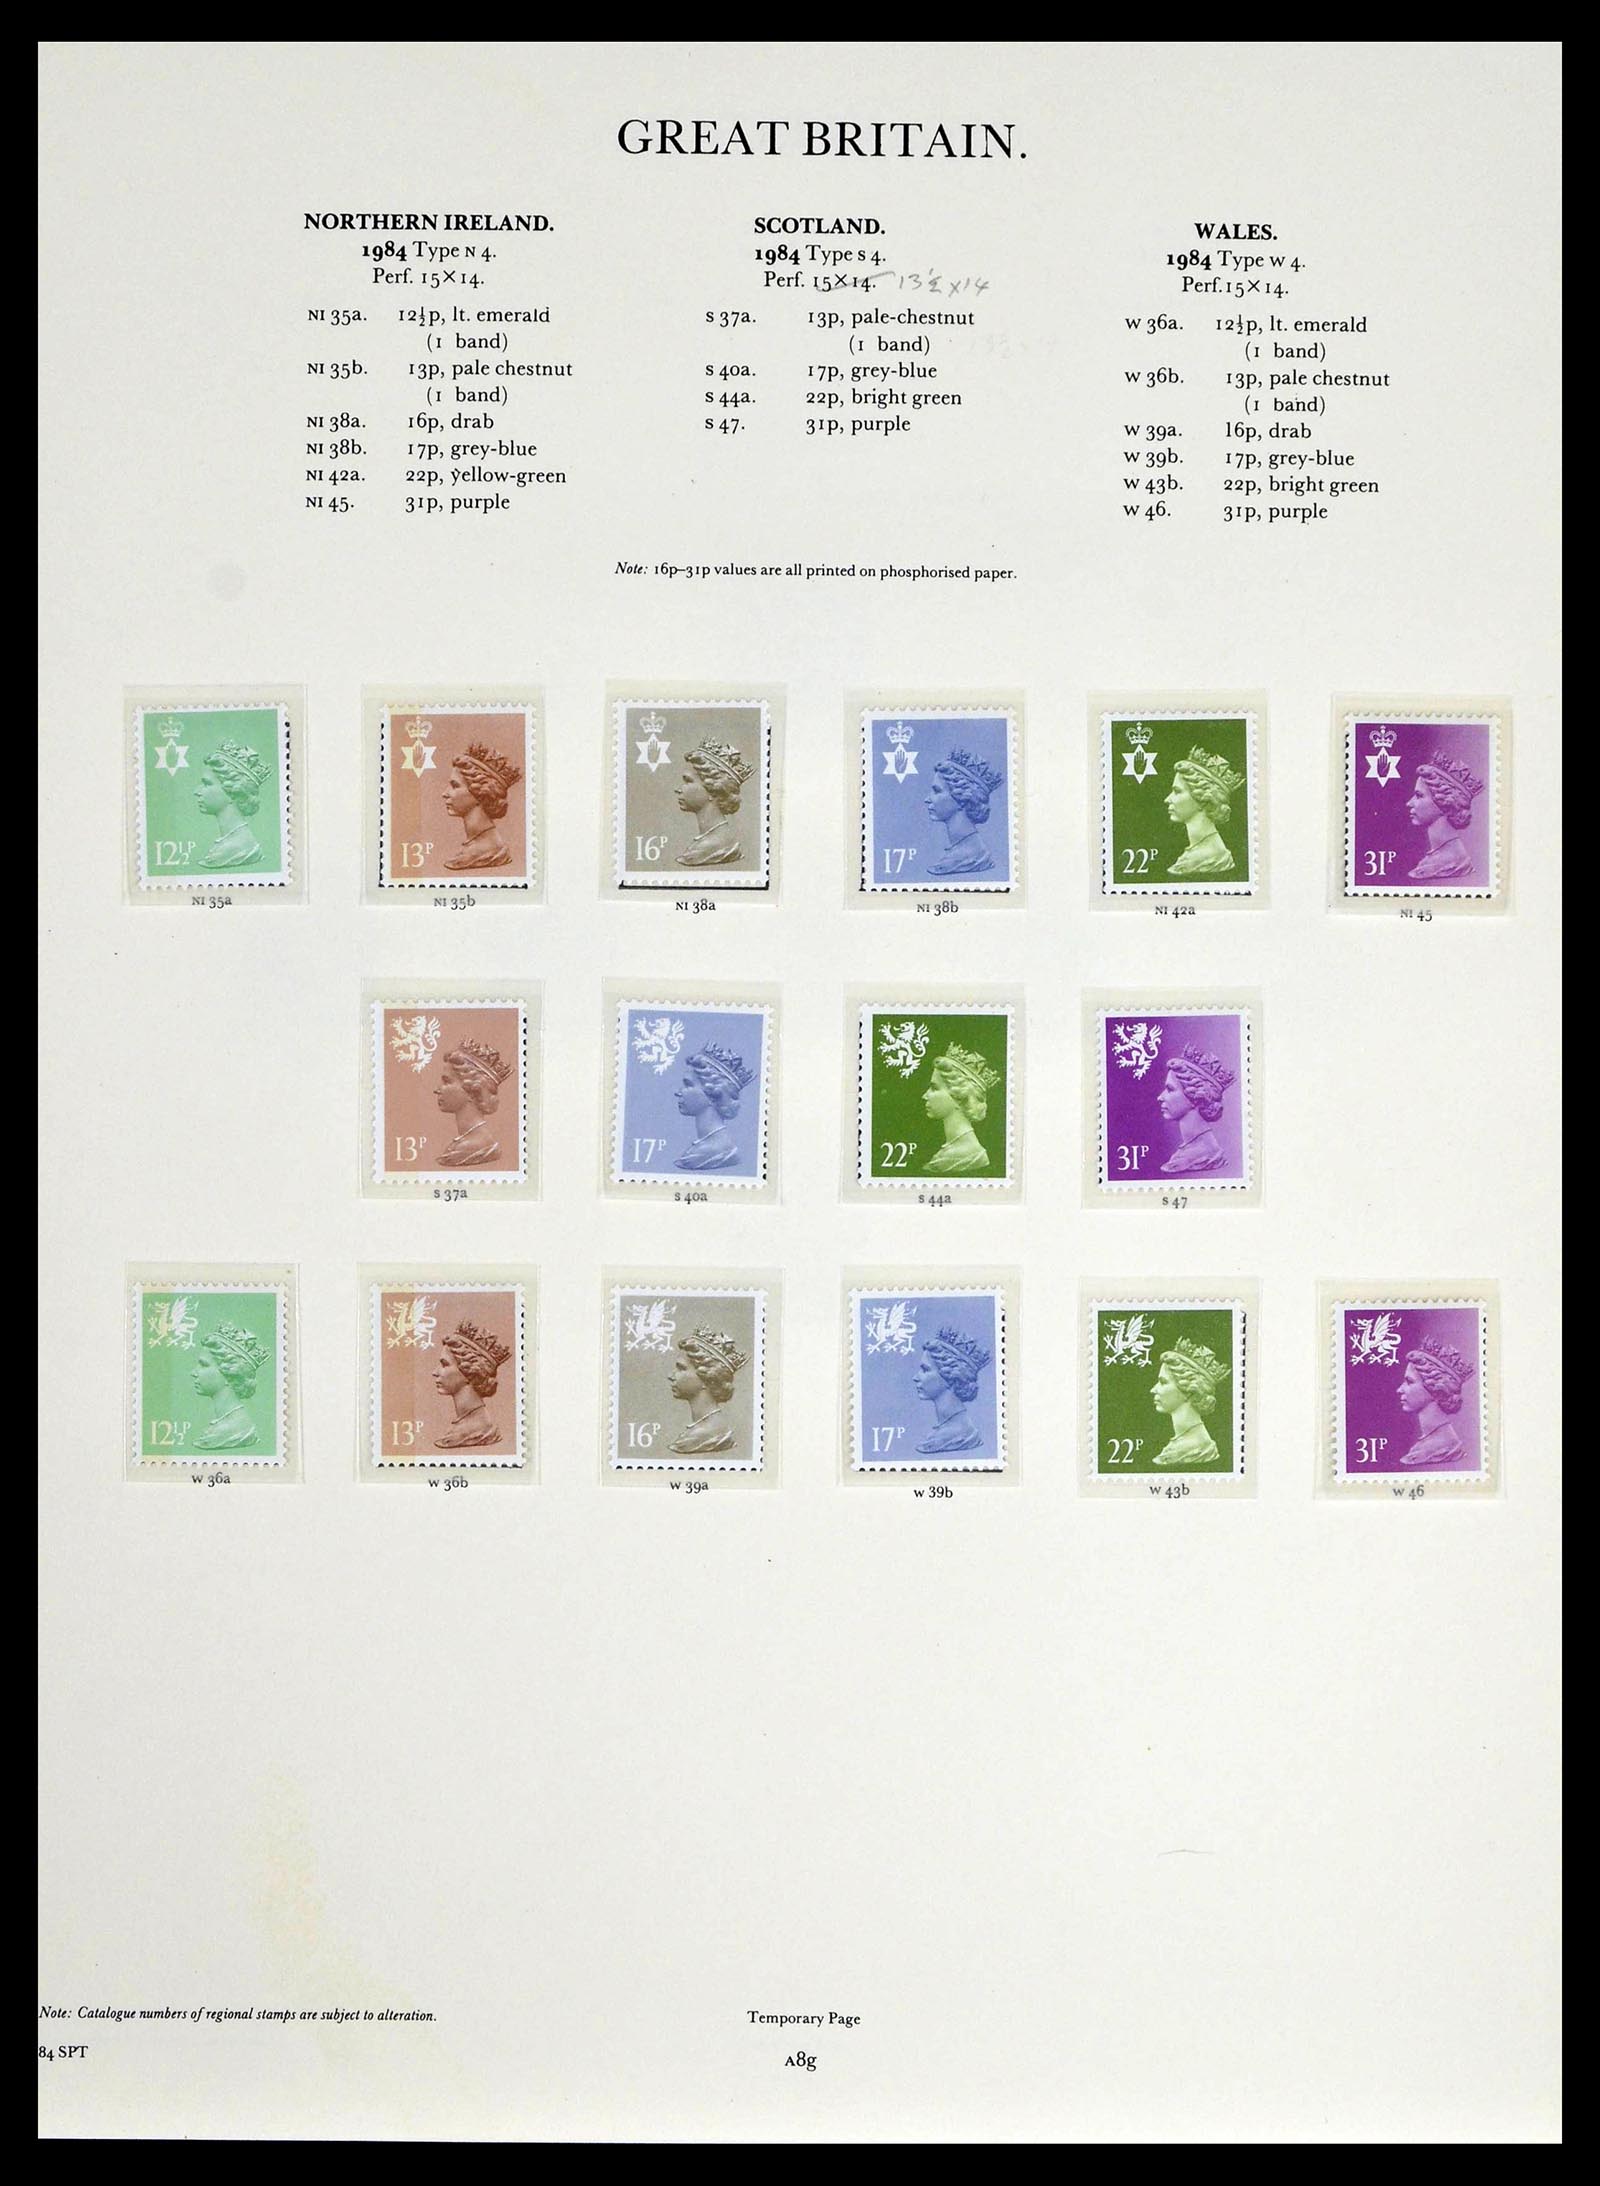 39025 0154 - Stamp collection 39025 Great Britain specialised 1840-1990.